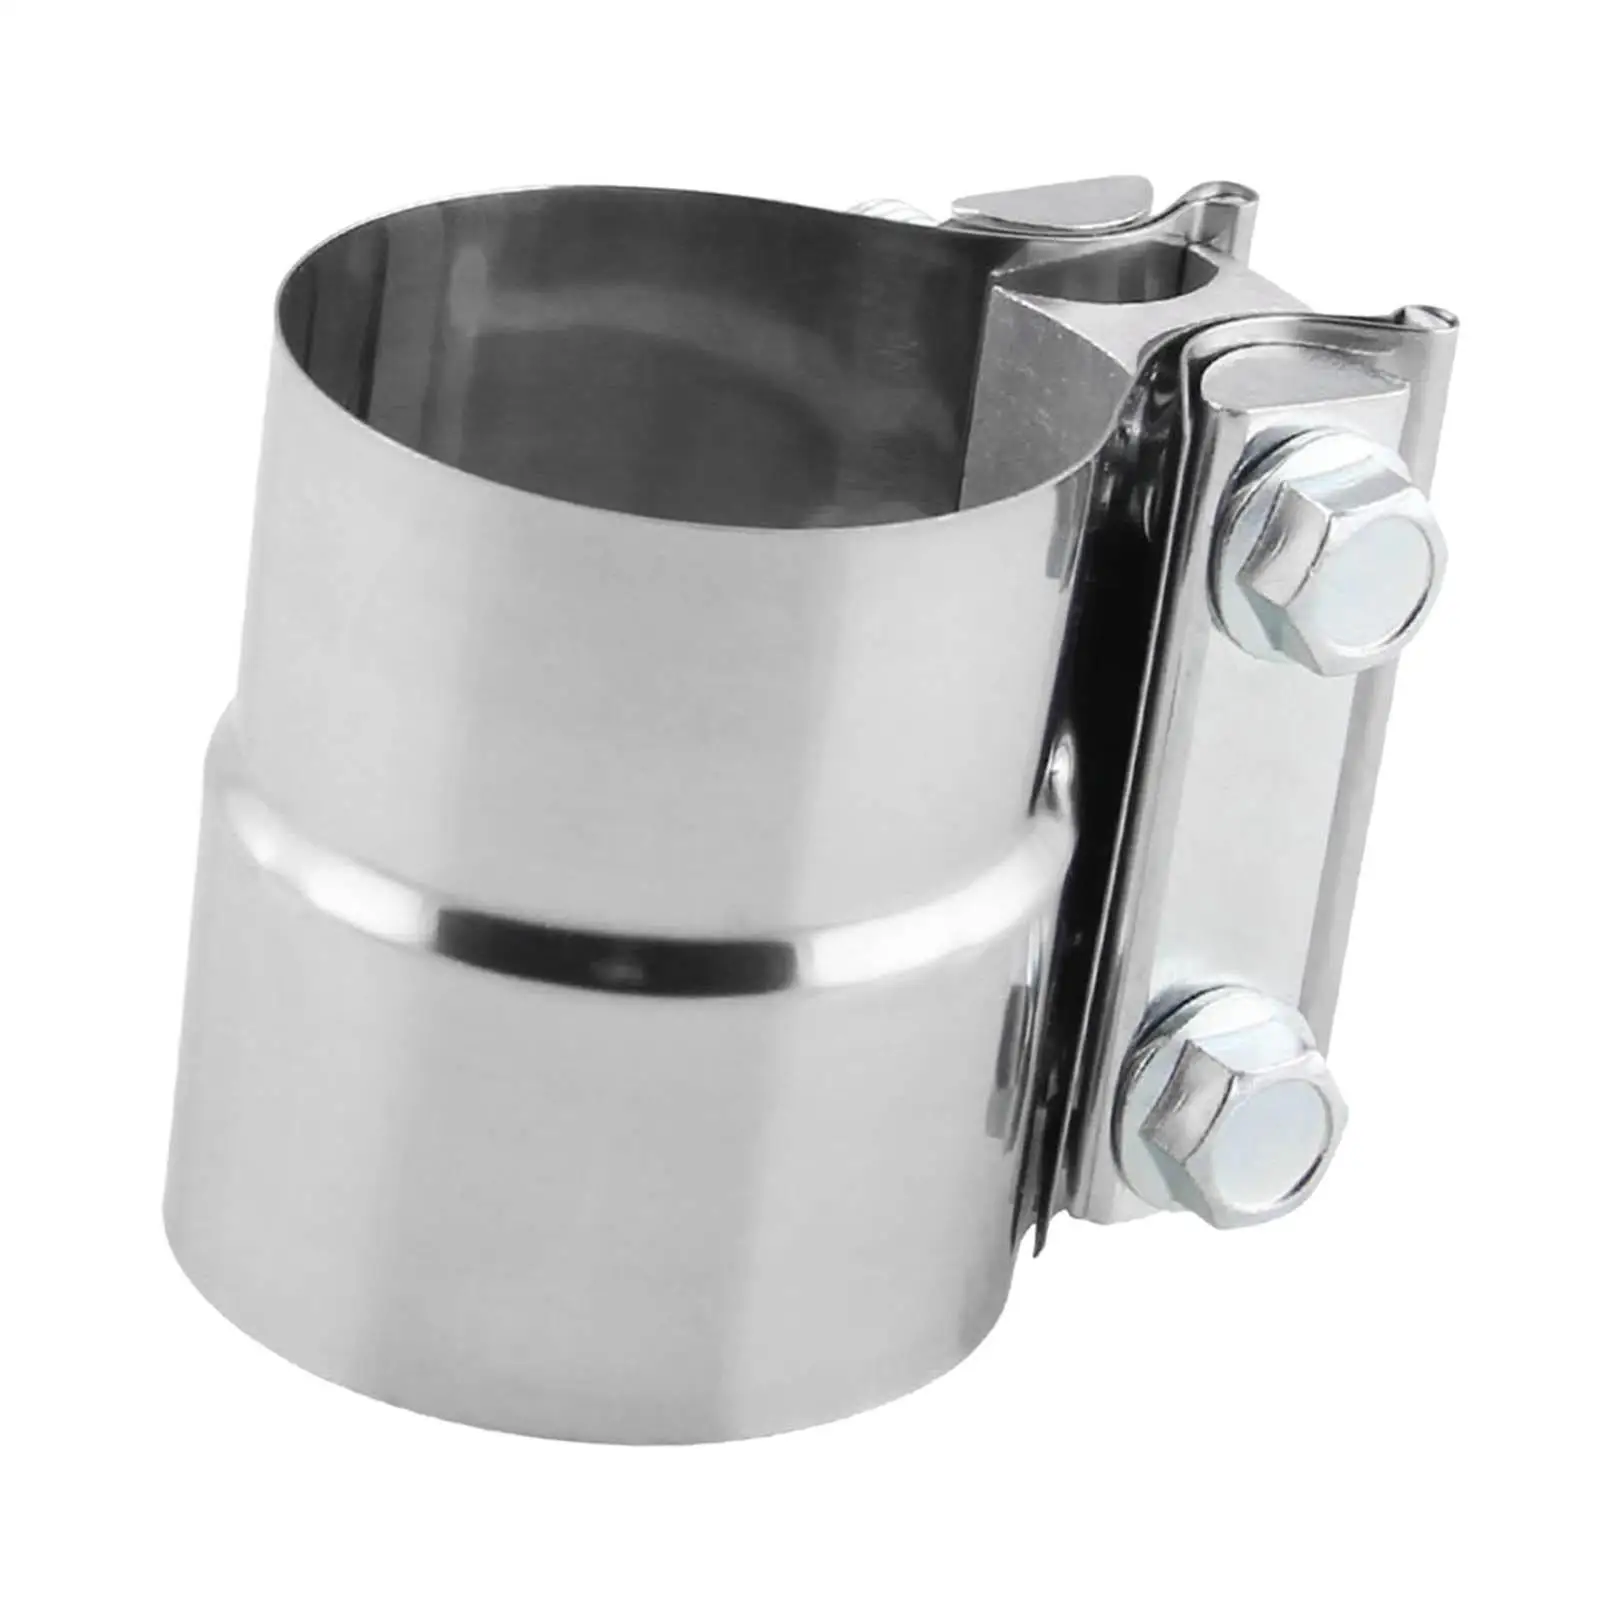 Universal Exhaust Pipe Band Clamp Exhaust Tubing Connection Stainless Steel